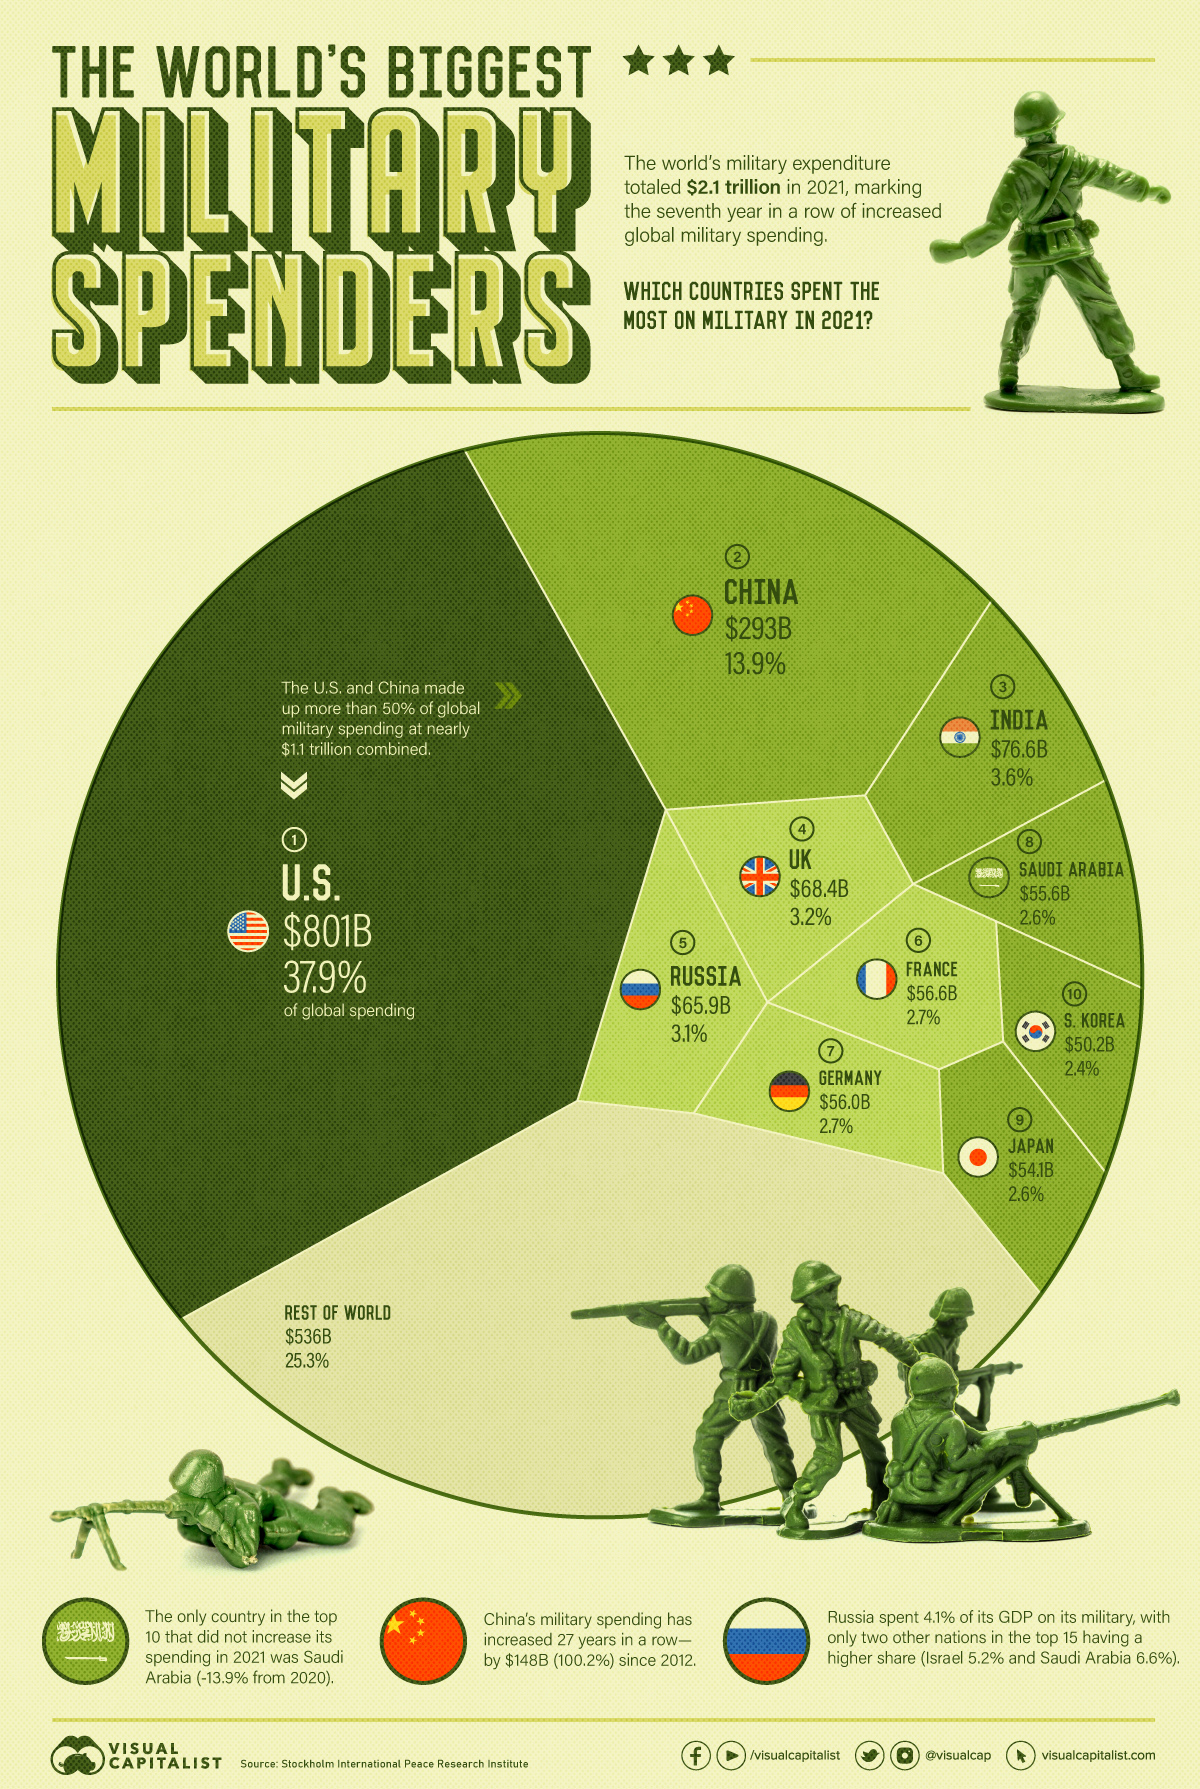 Visualization of the top countries by military spending in the world